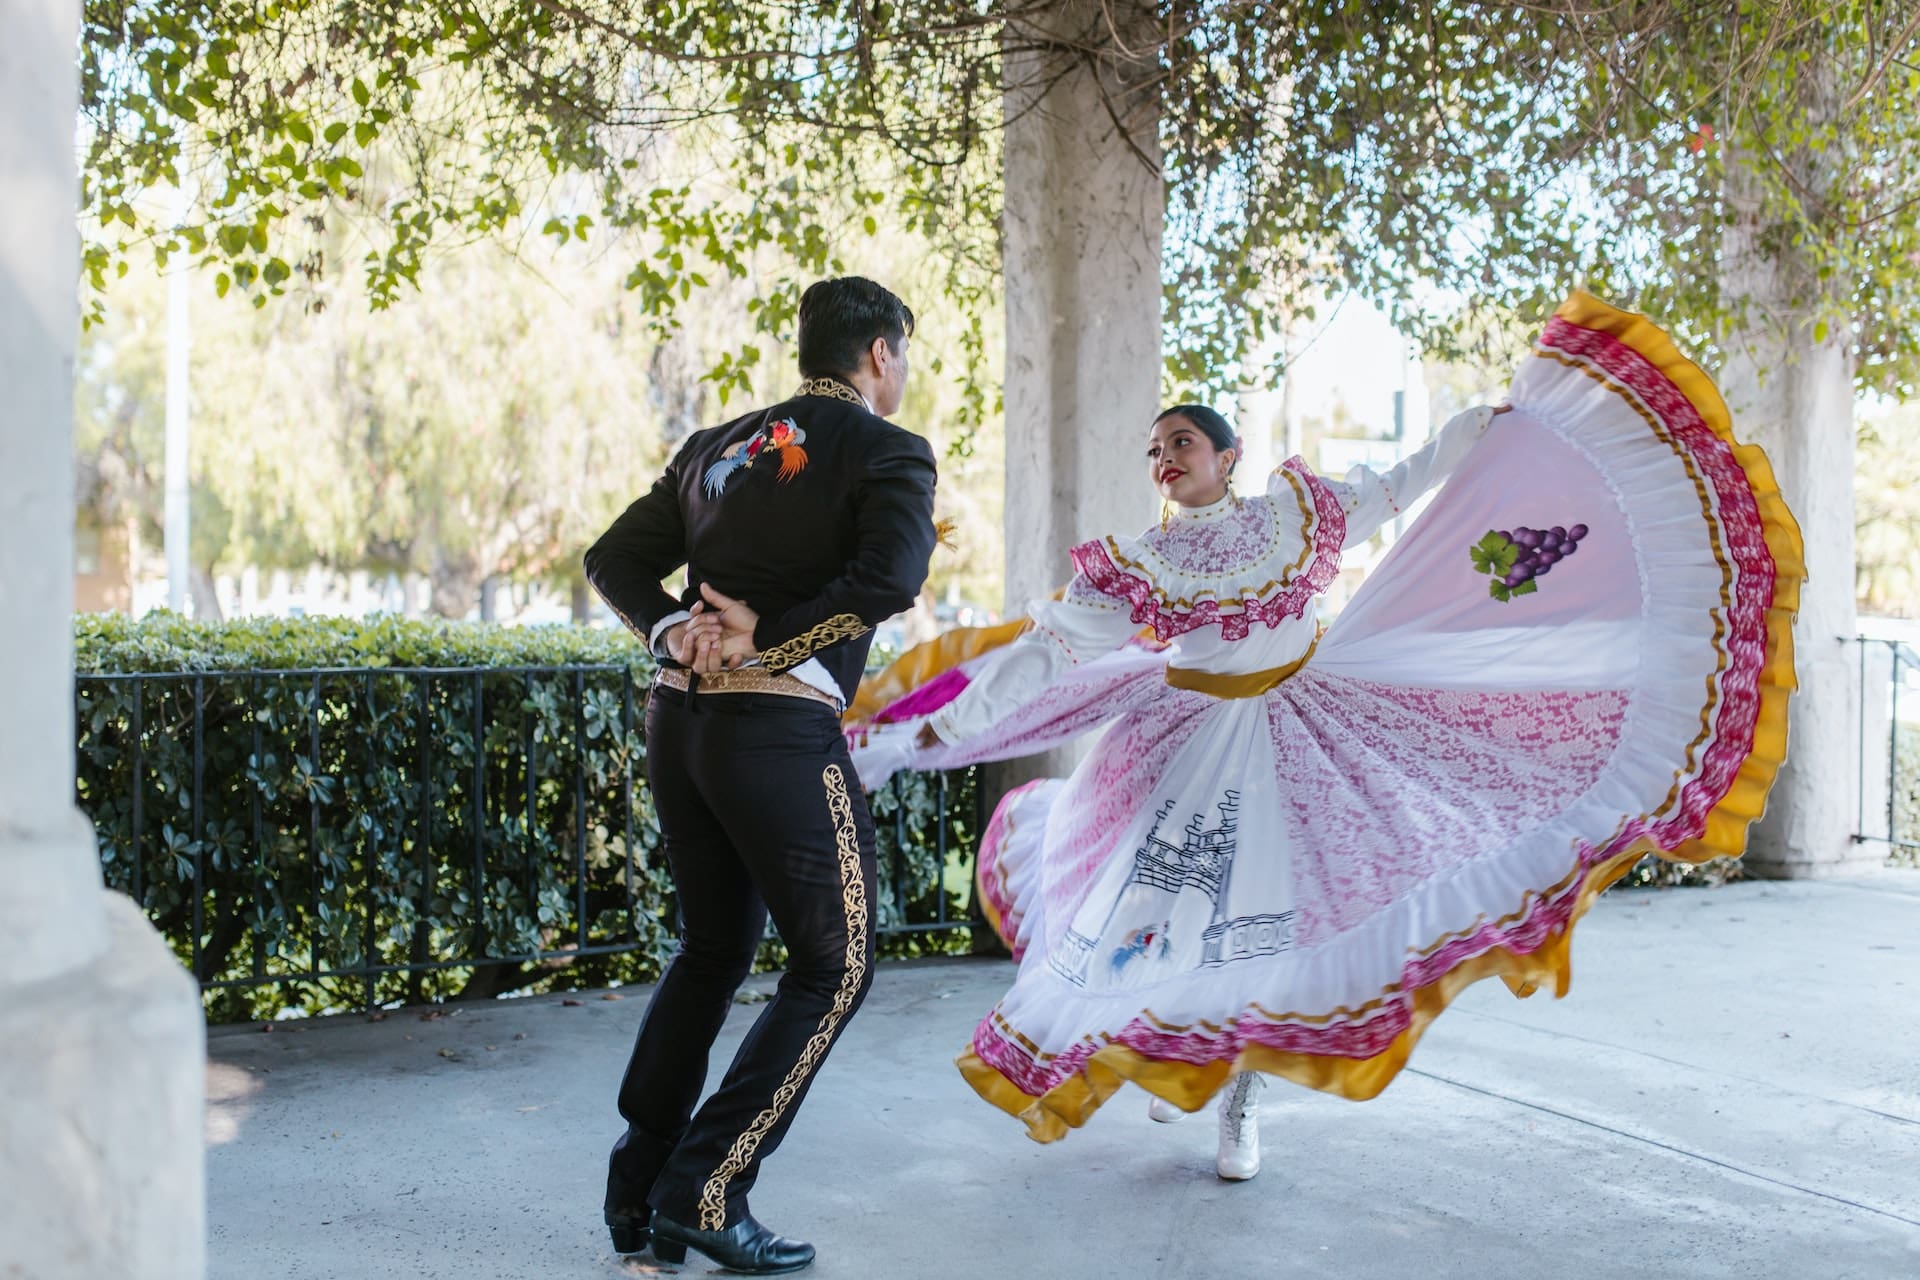 A captivating image capturing the vibrant atmosphere of a traditional Mexican folk dance performance during the annual Fiesta Edinburg, with colorful costumes and lively music, symbolizing Edinburg's rich cultural scene and community celebrations.